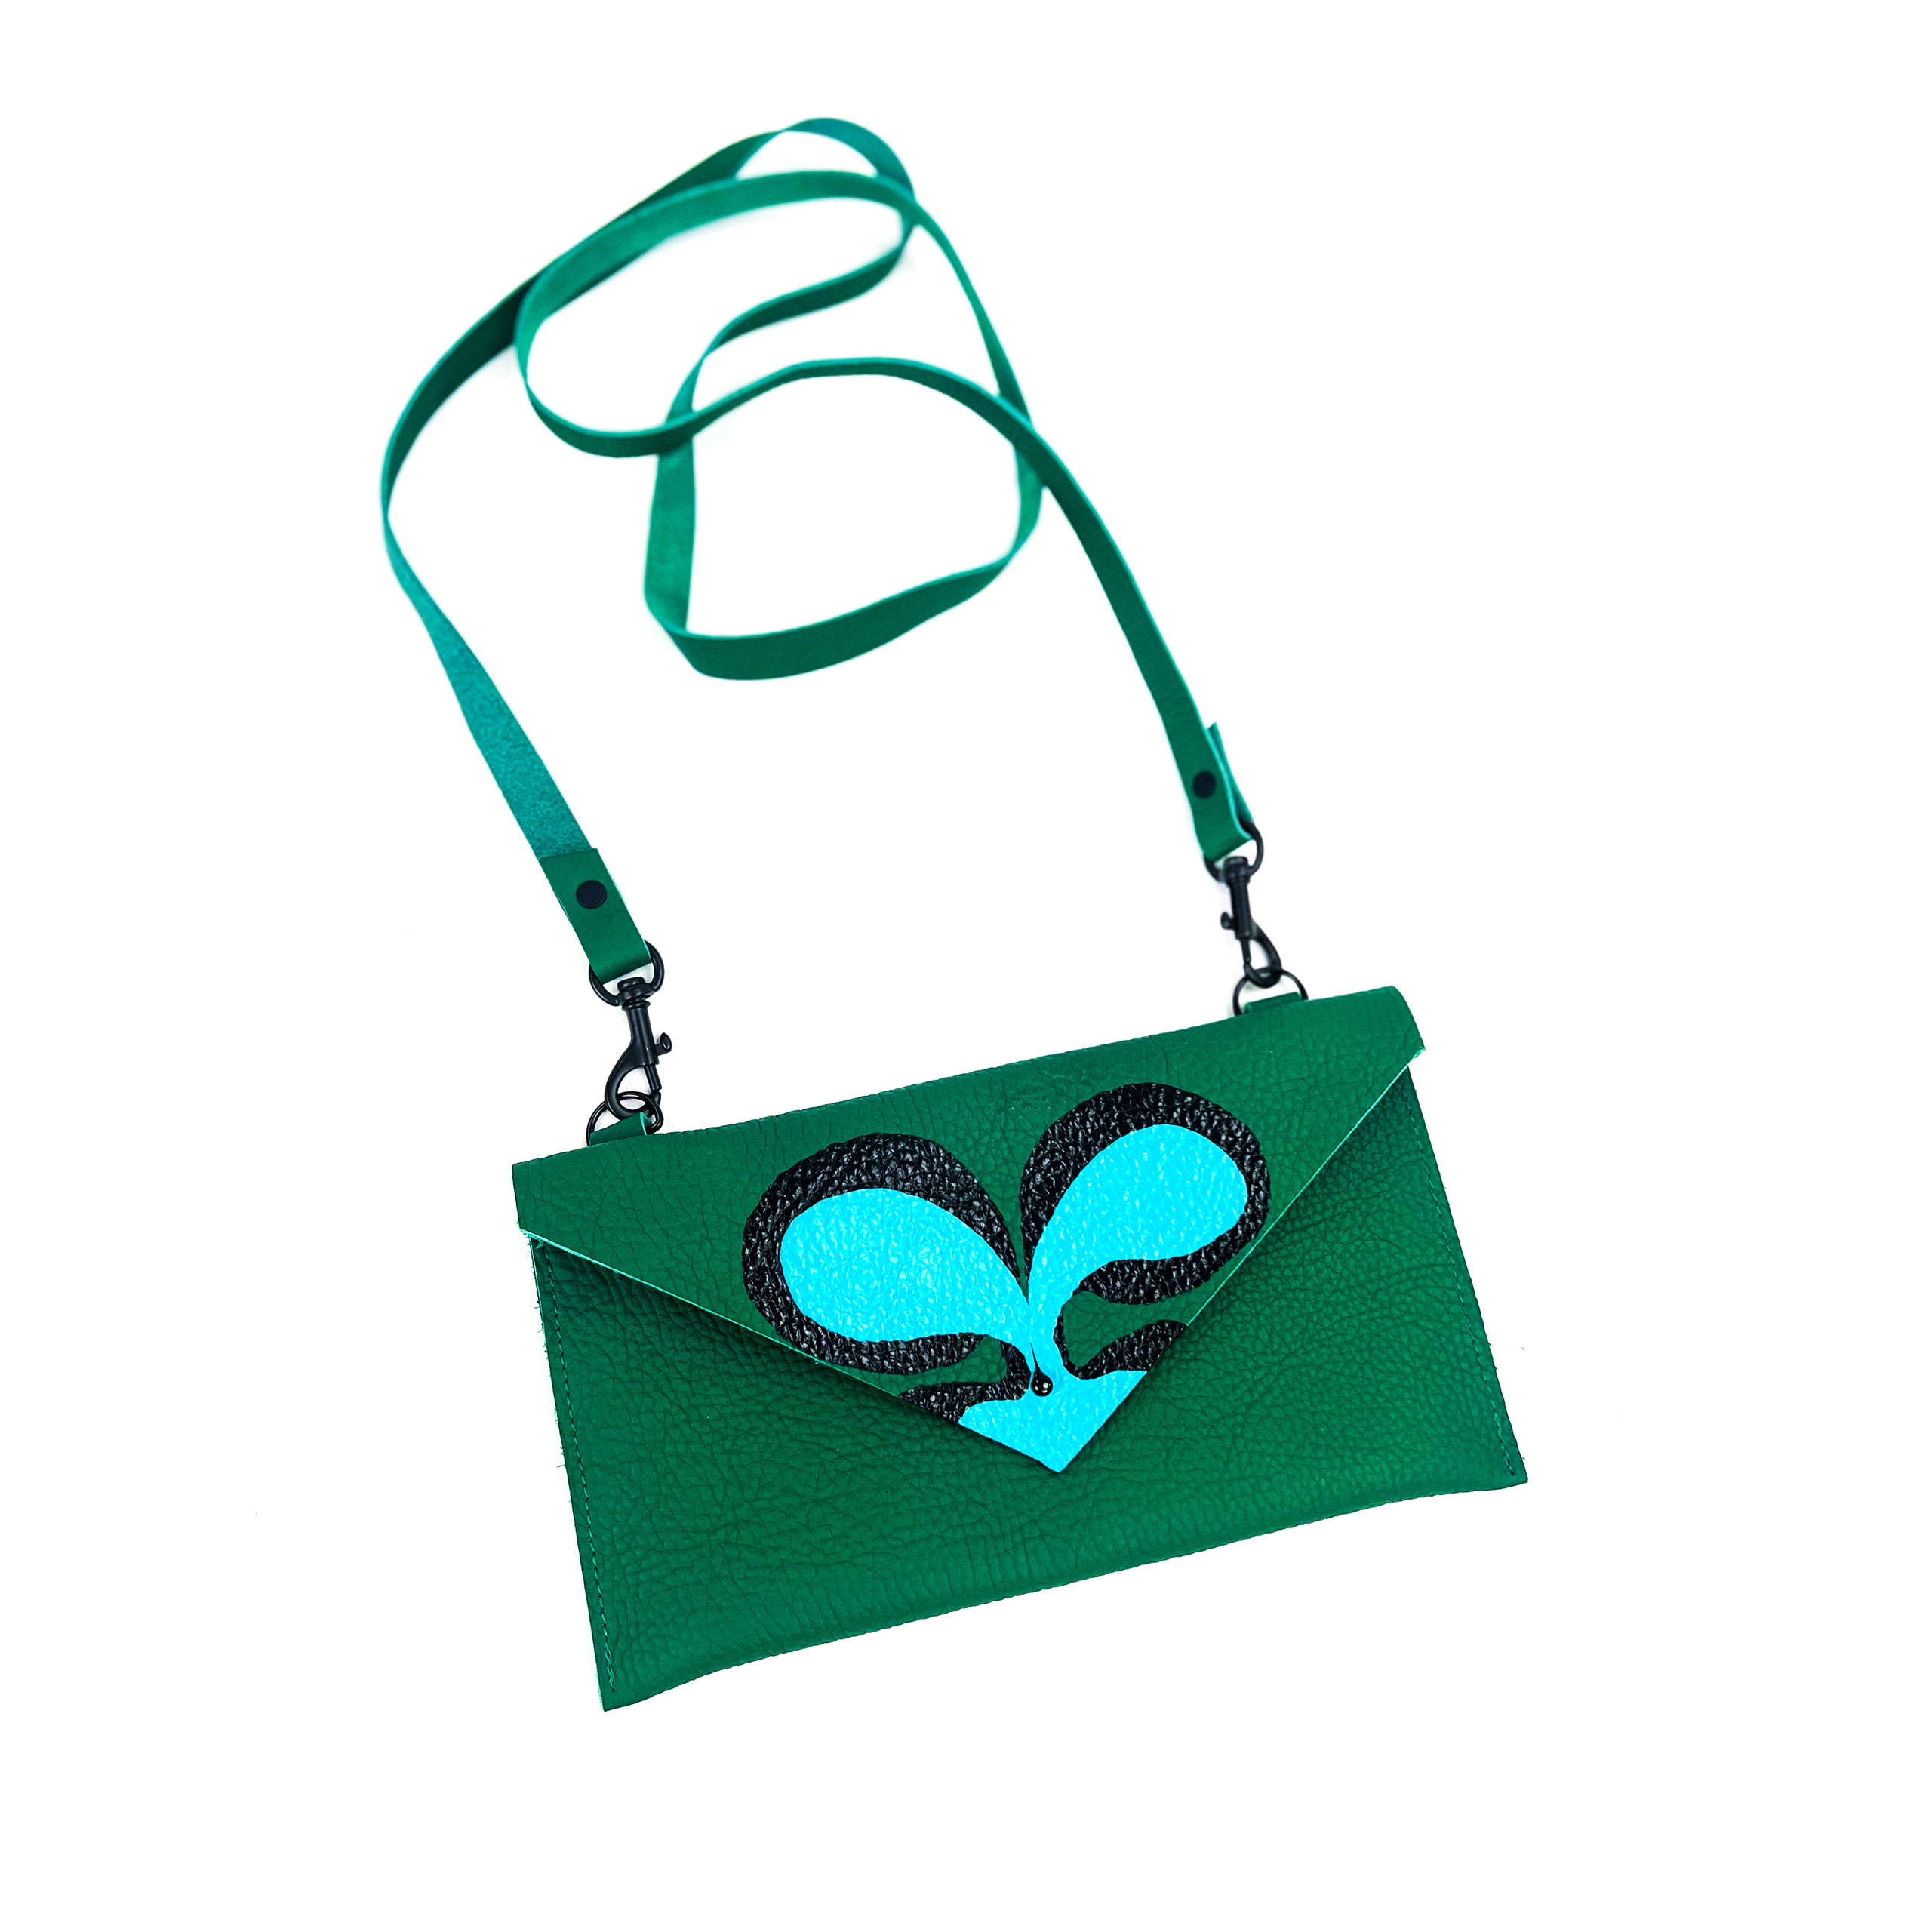 A teal green leather shoulder bag with a sparkling blue heart design, isolated on a white background.